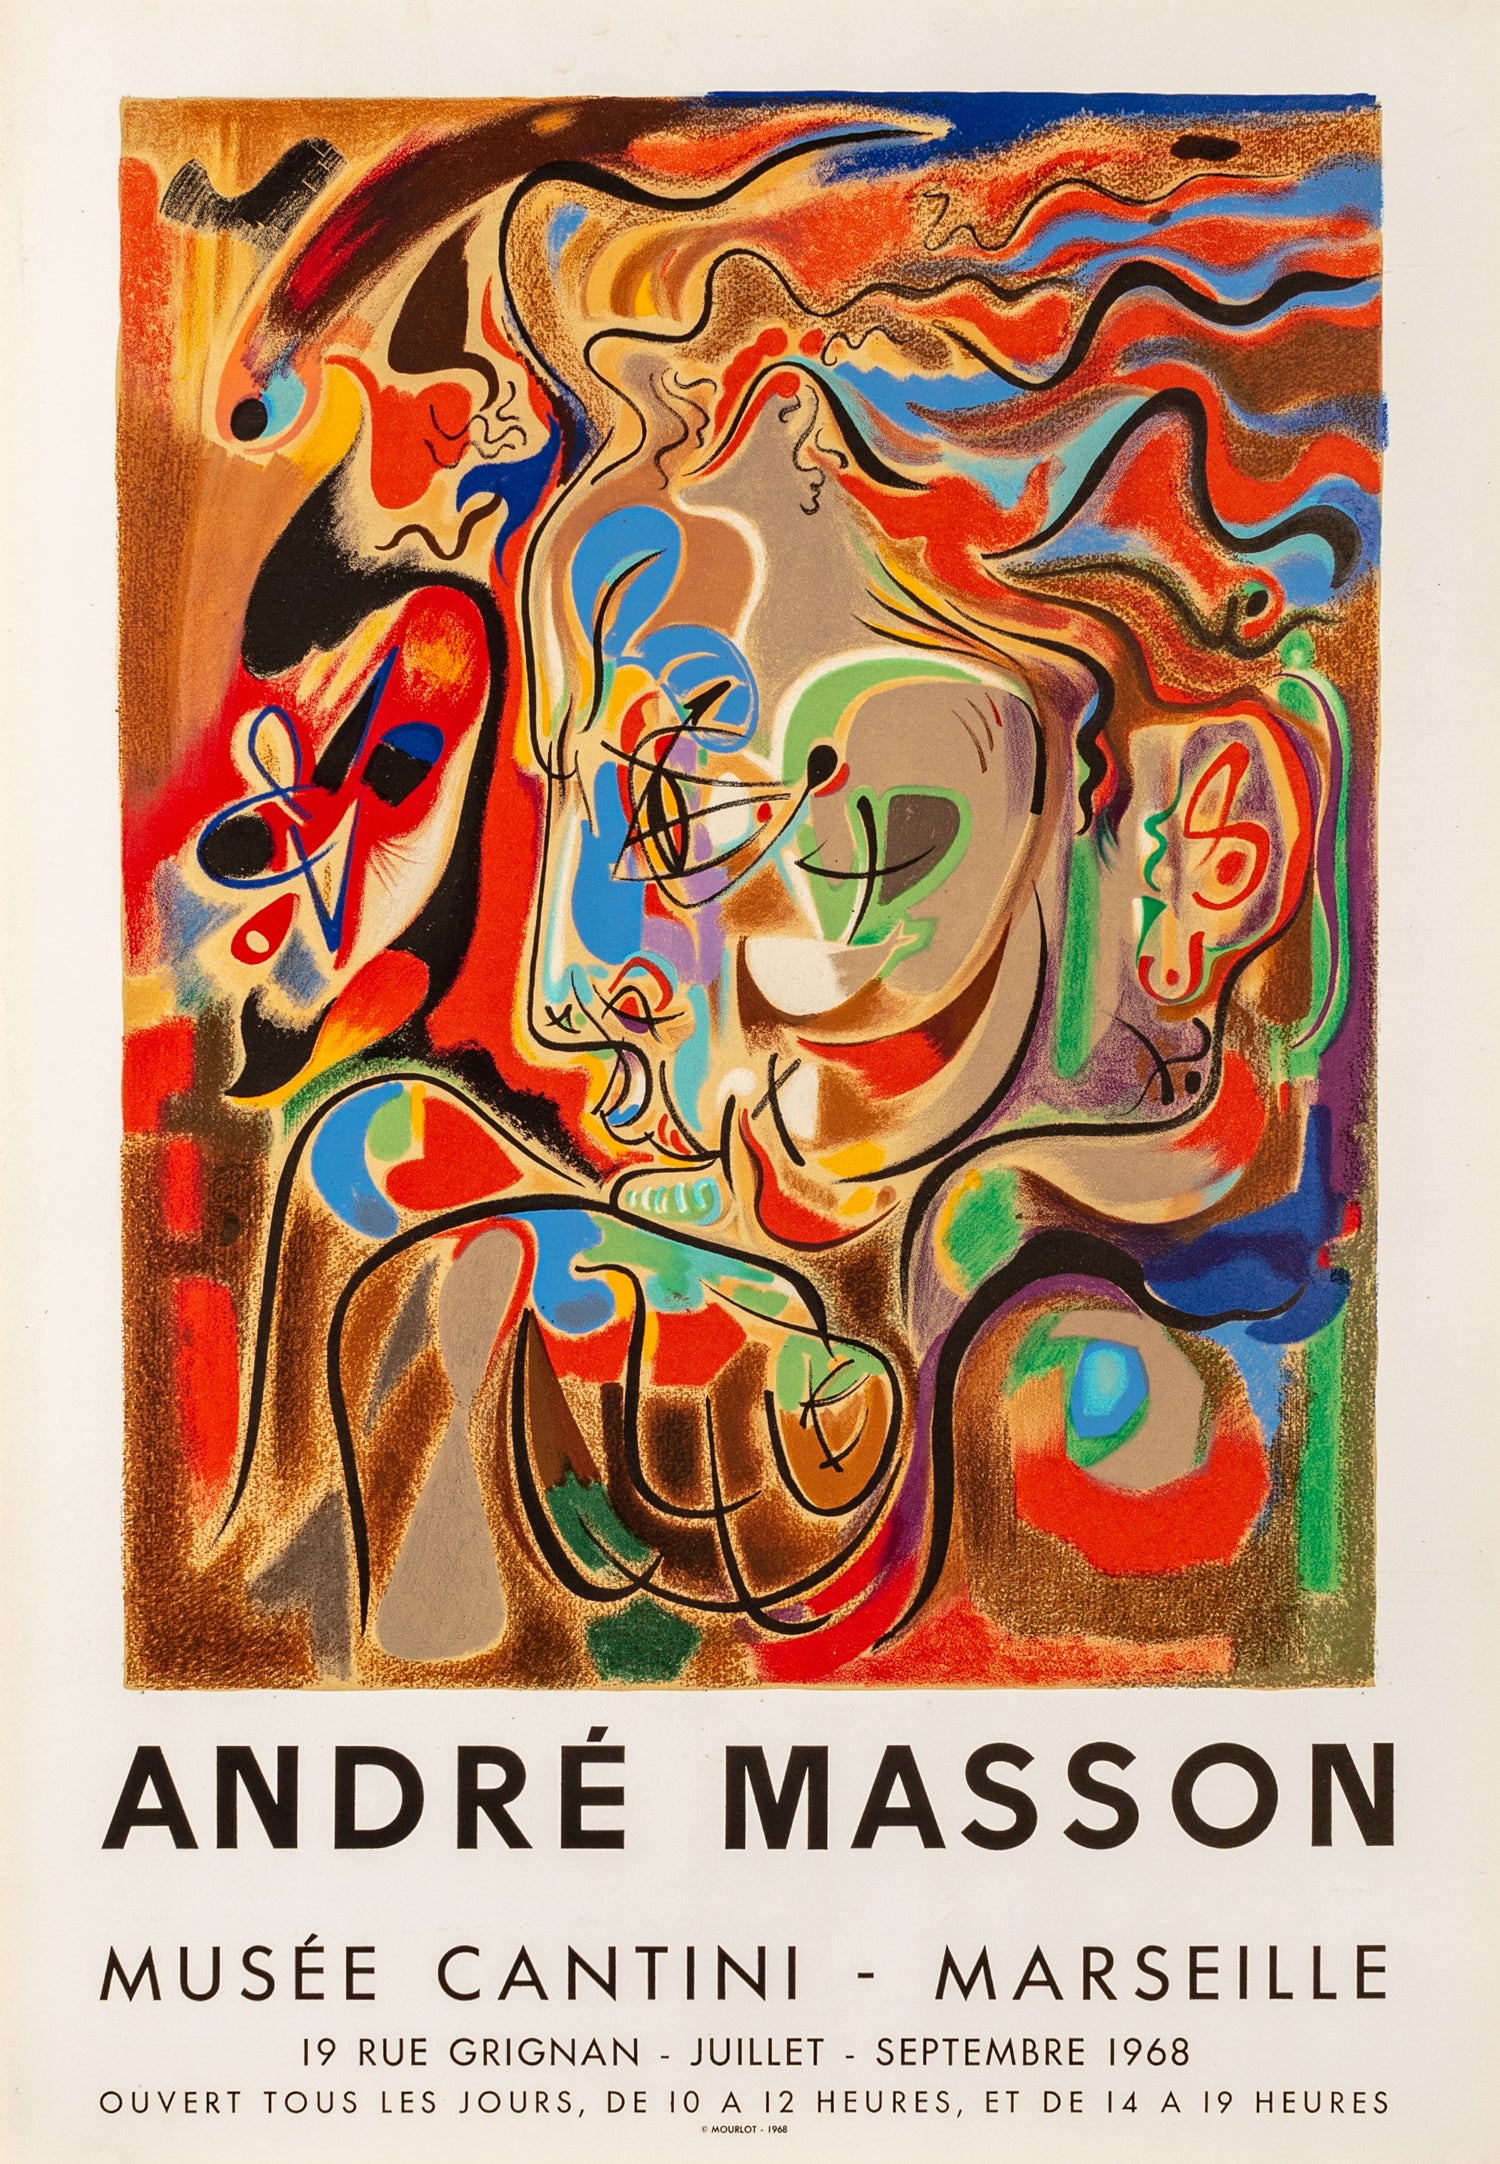 Galerie Louise Leiris 1968 by André Masson – Mourlot Editions